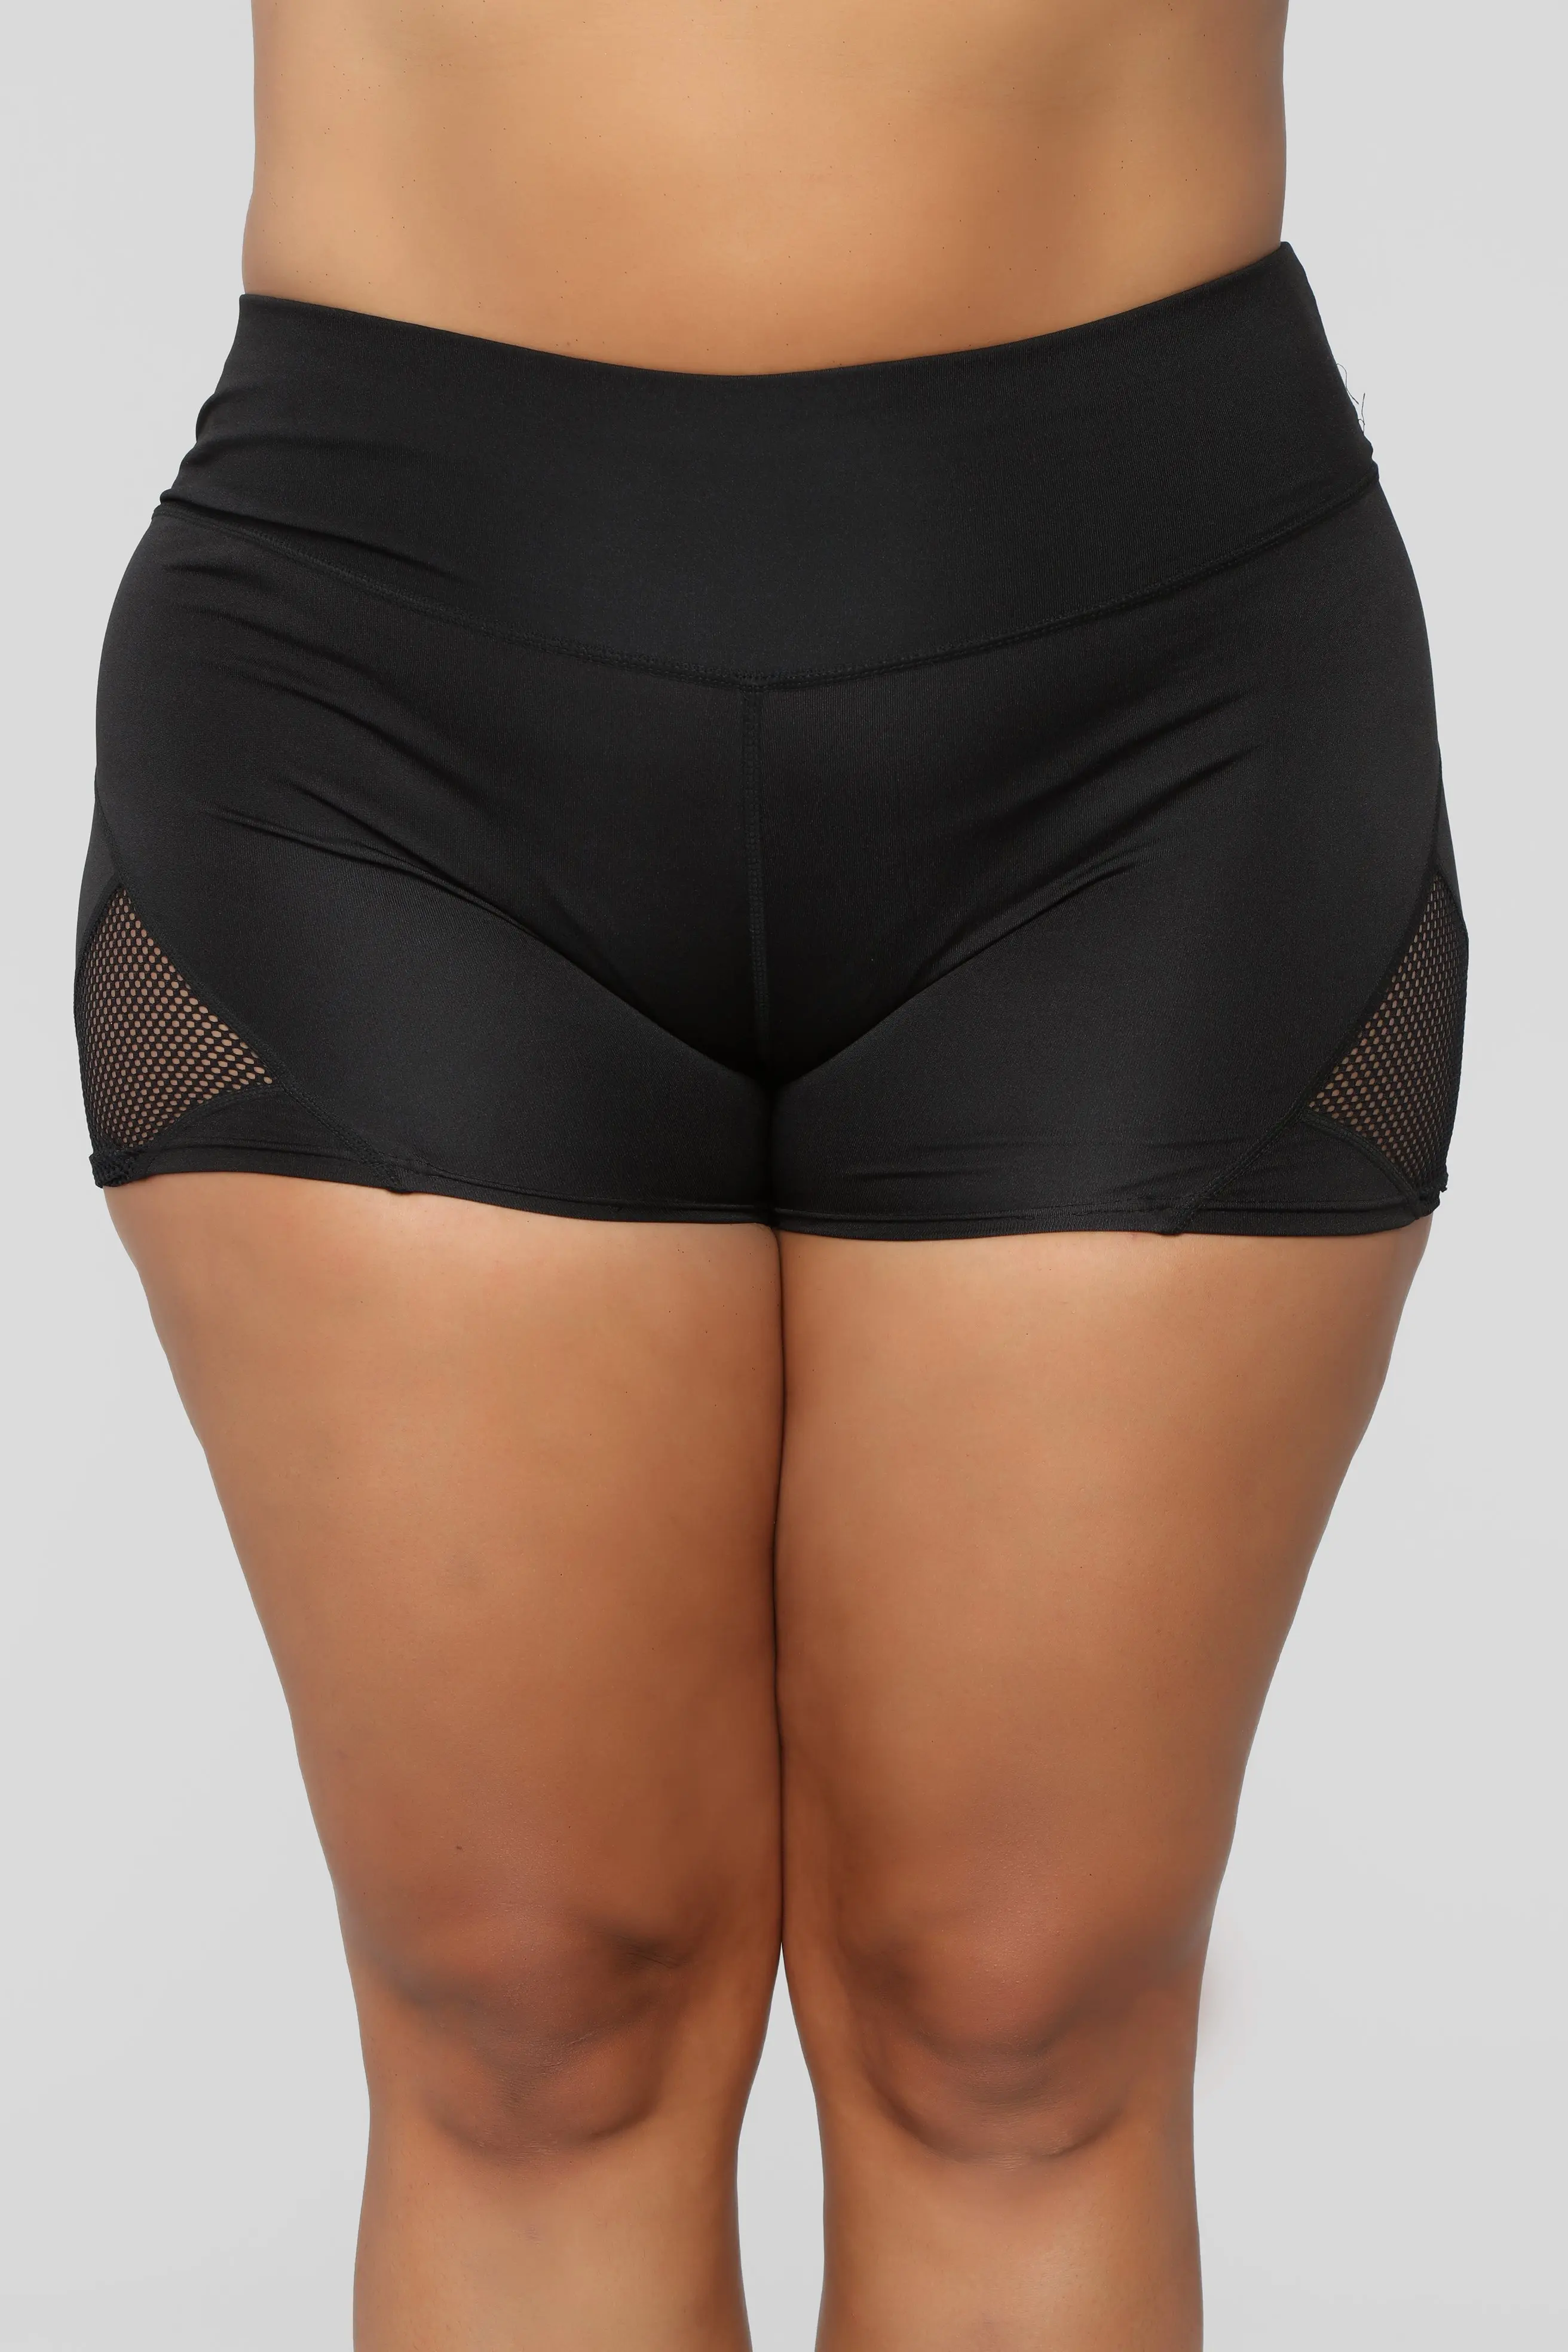 RBX Womens Leggings Black Capri Active High Waisted Stretch Wide Waistband  SizeM for sale online